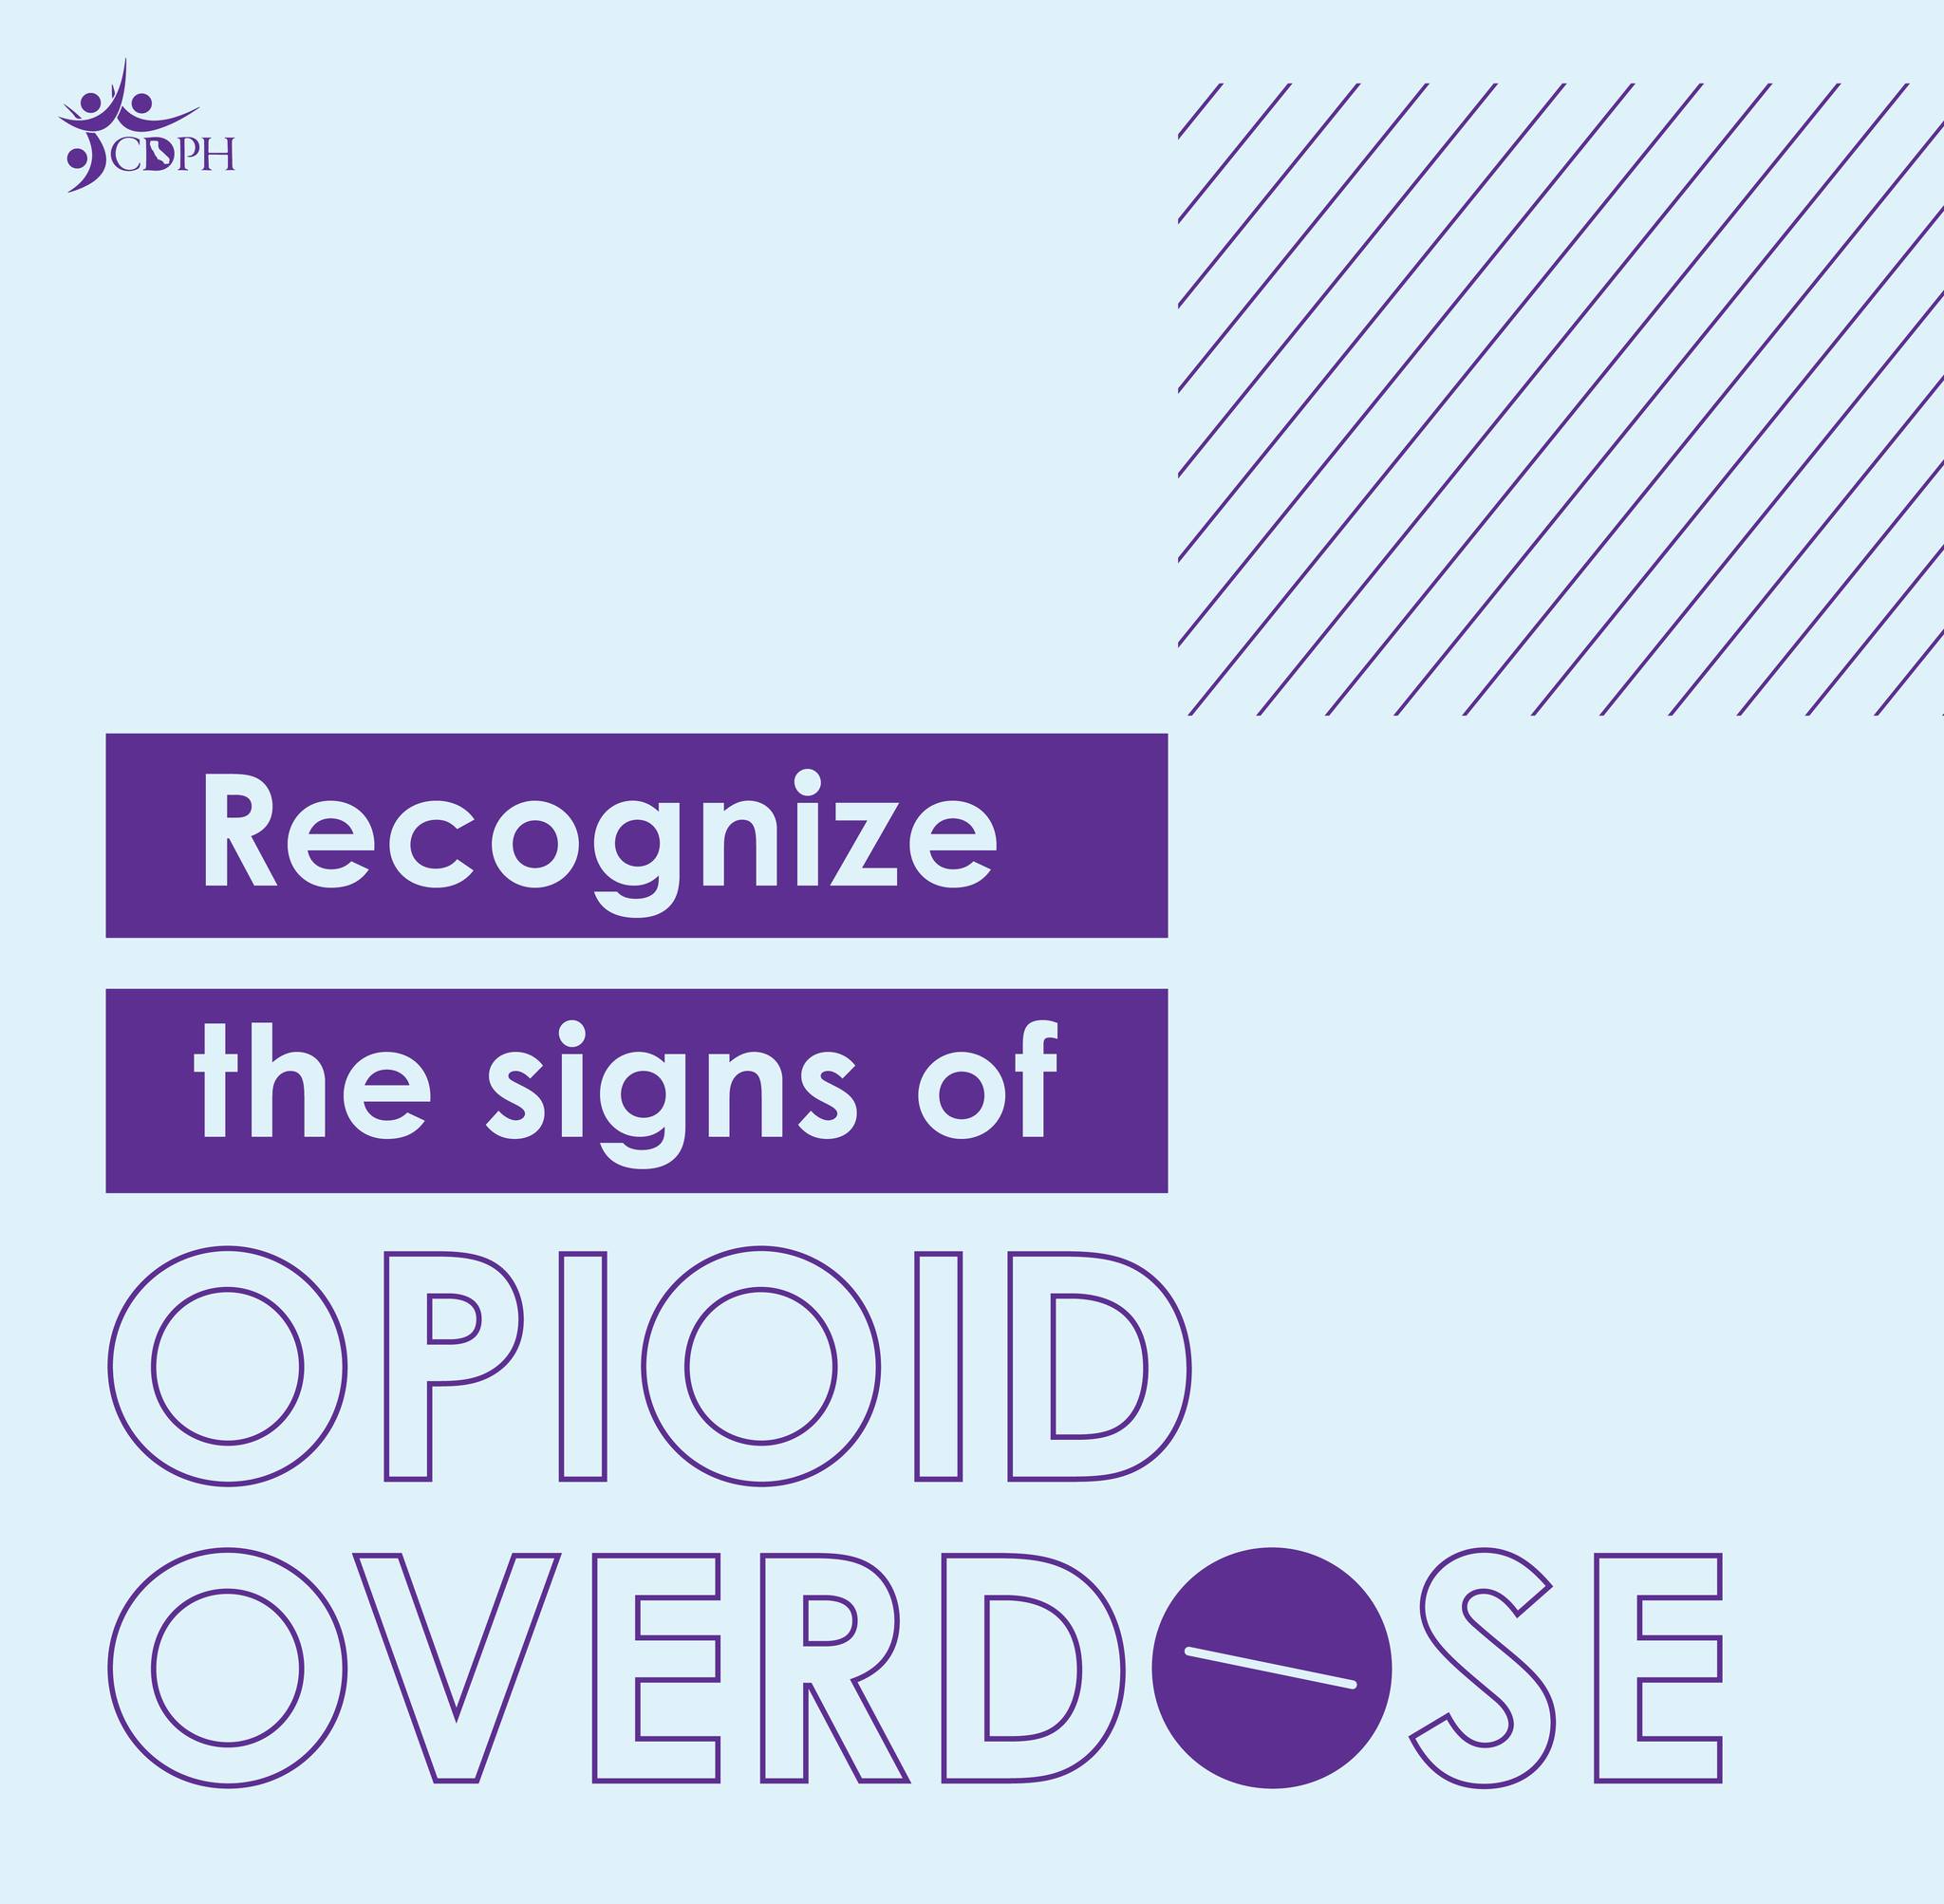 Social Media pic: Recognize the signs of Opioid Overdose